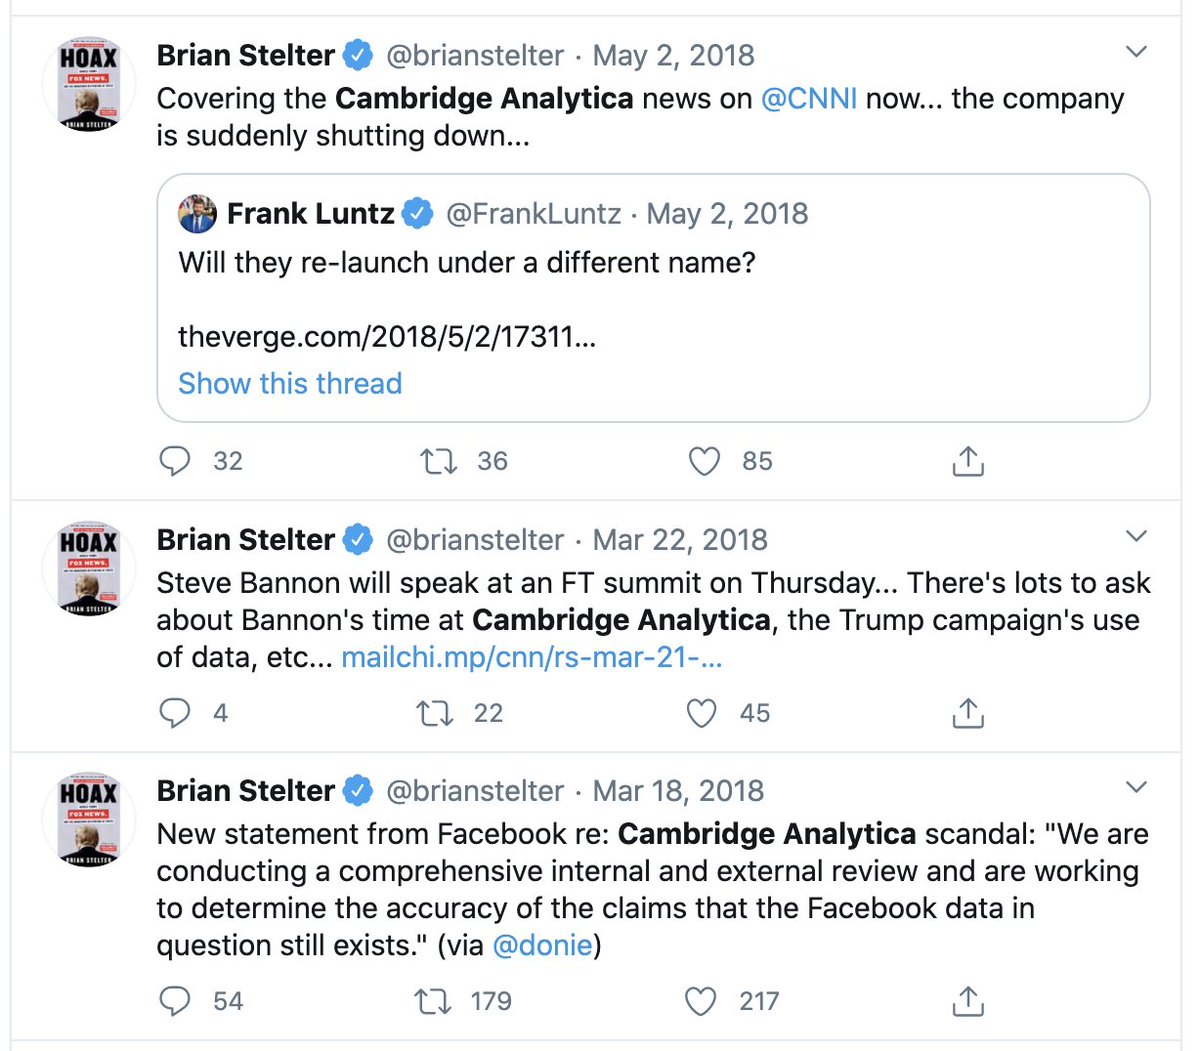 Don't know if anyone at CNN is covering debunking of the Cambridge Analytica whistleblower panic. This is what it looked like back in 2018.